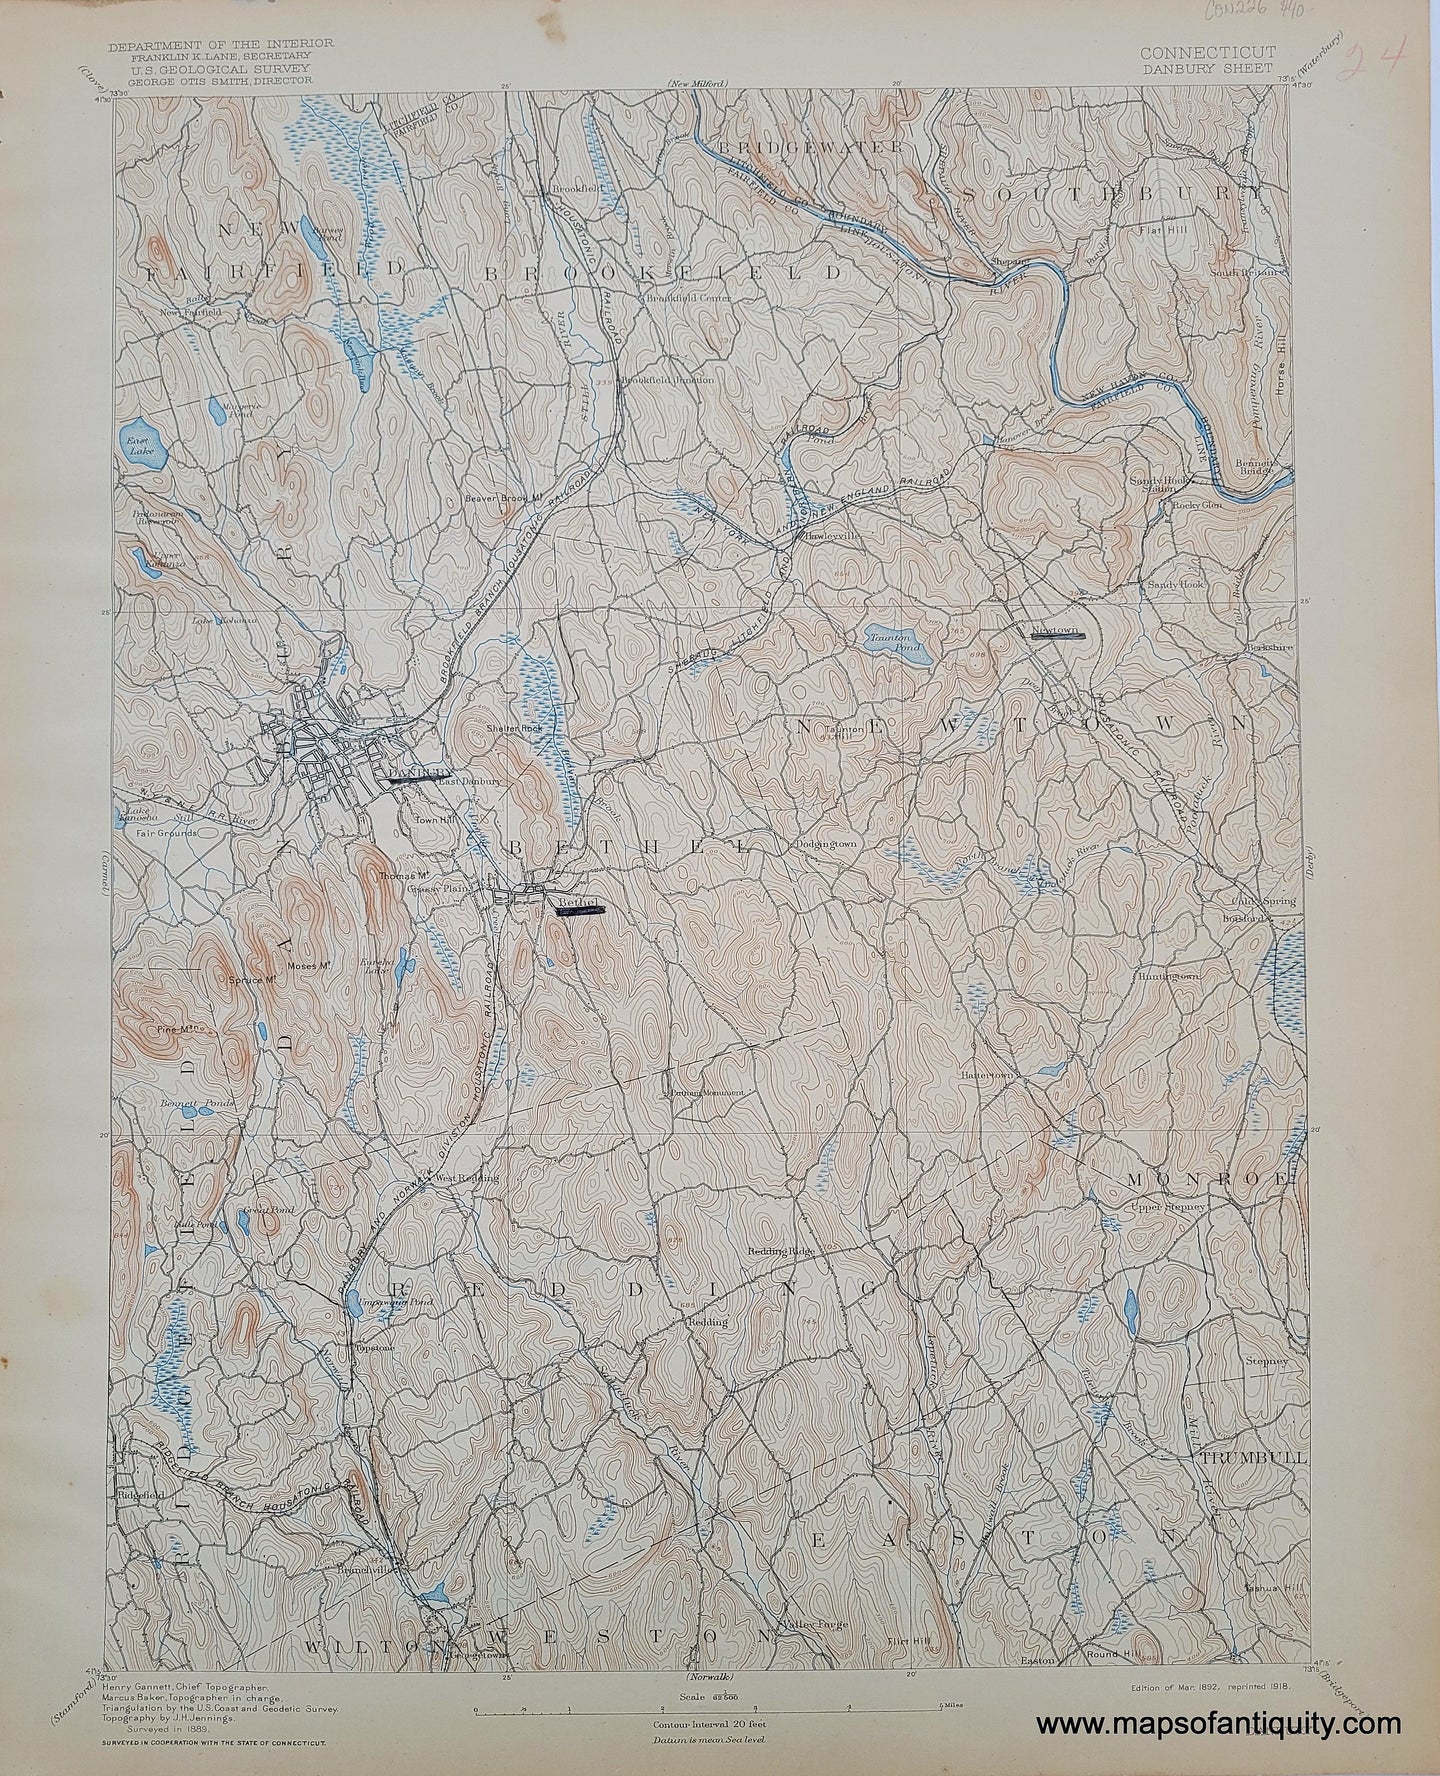 Antique-Topographical-Map-Topography-Connecticut-CT-Danbury-Sheet-USGS-United-States-Geological-Survey-Maps-of-Antiquity